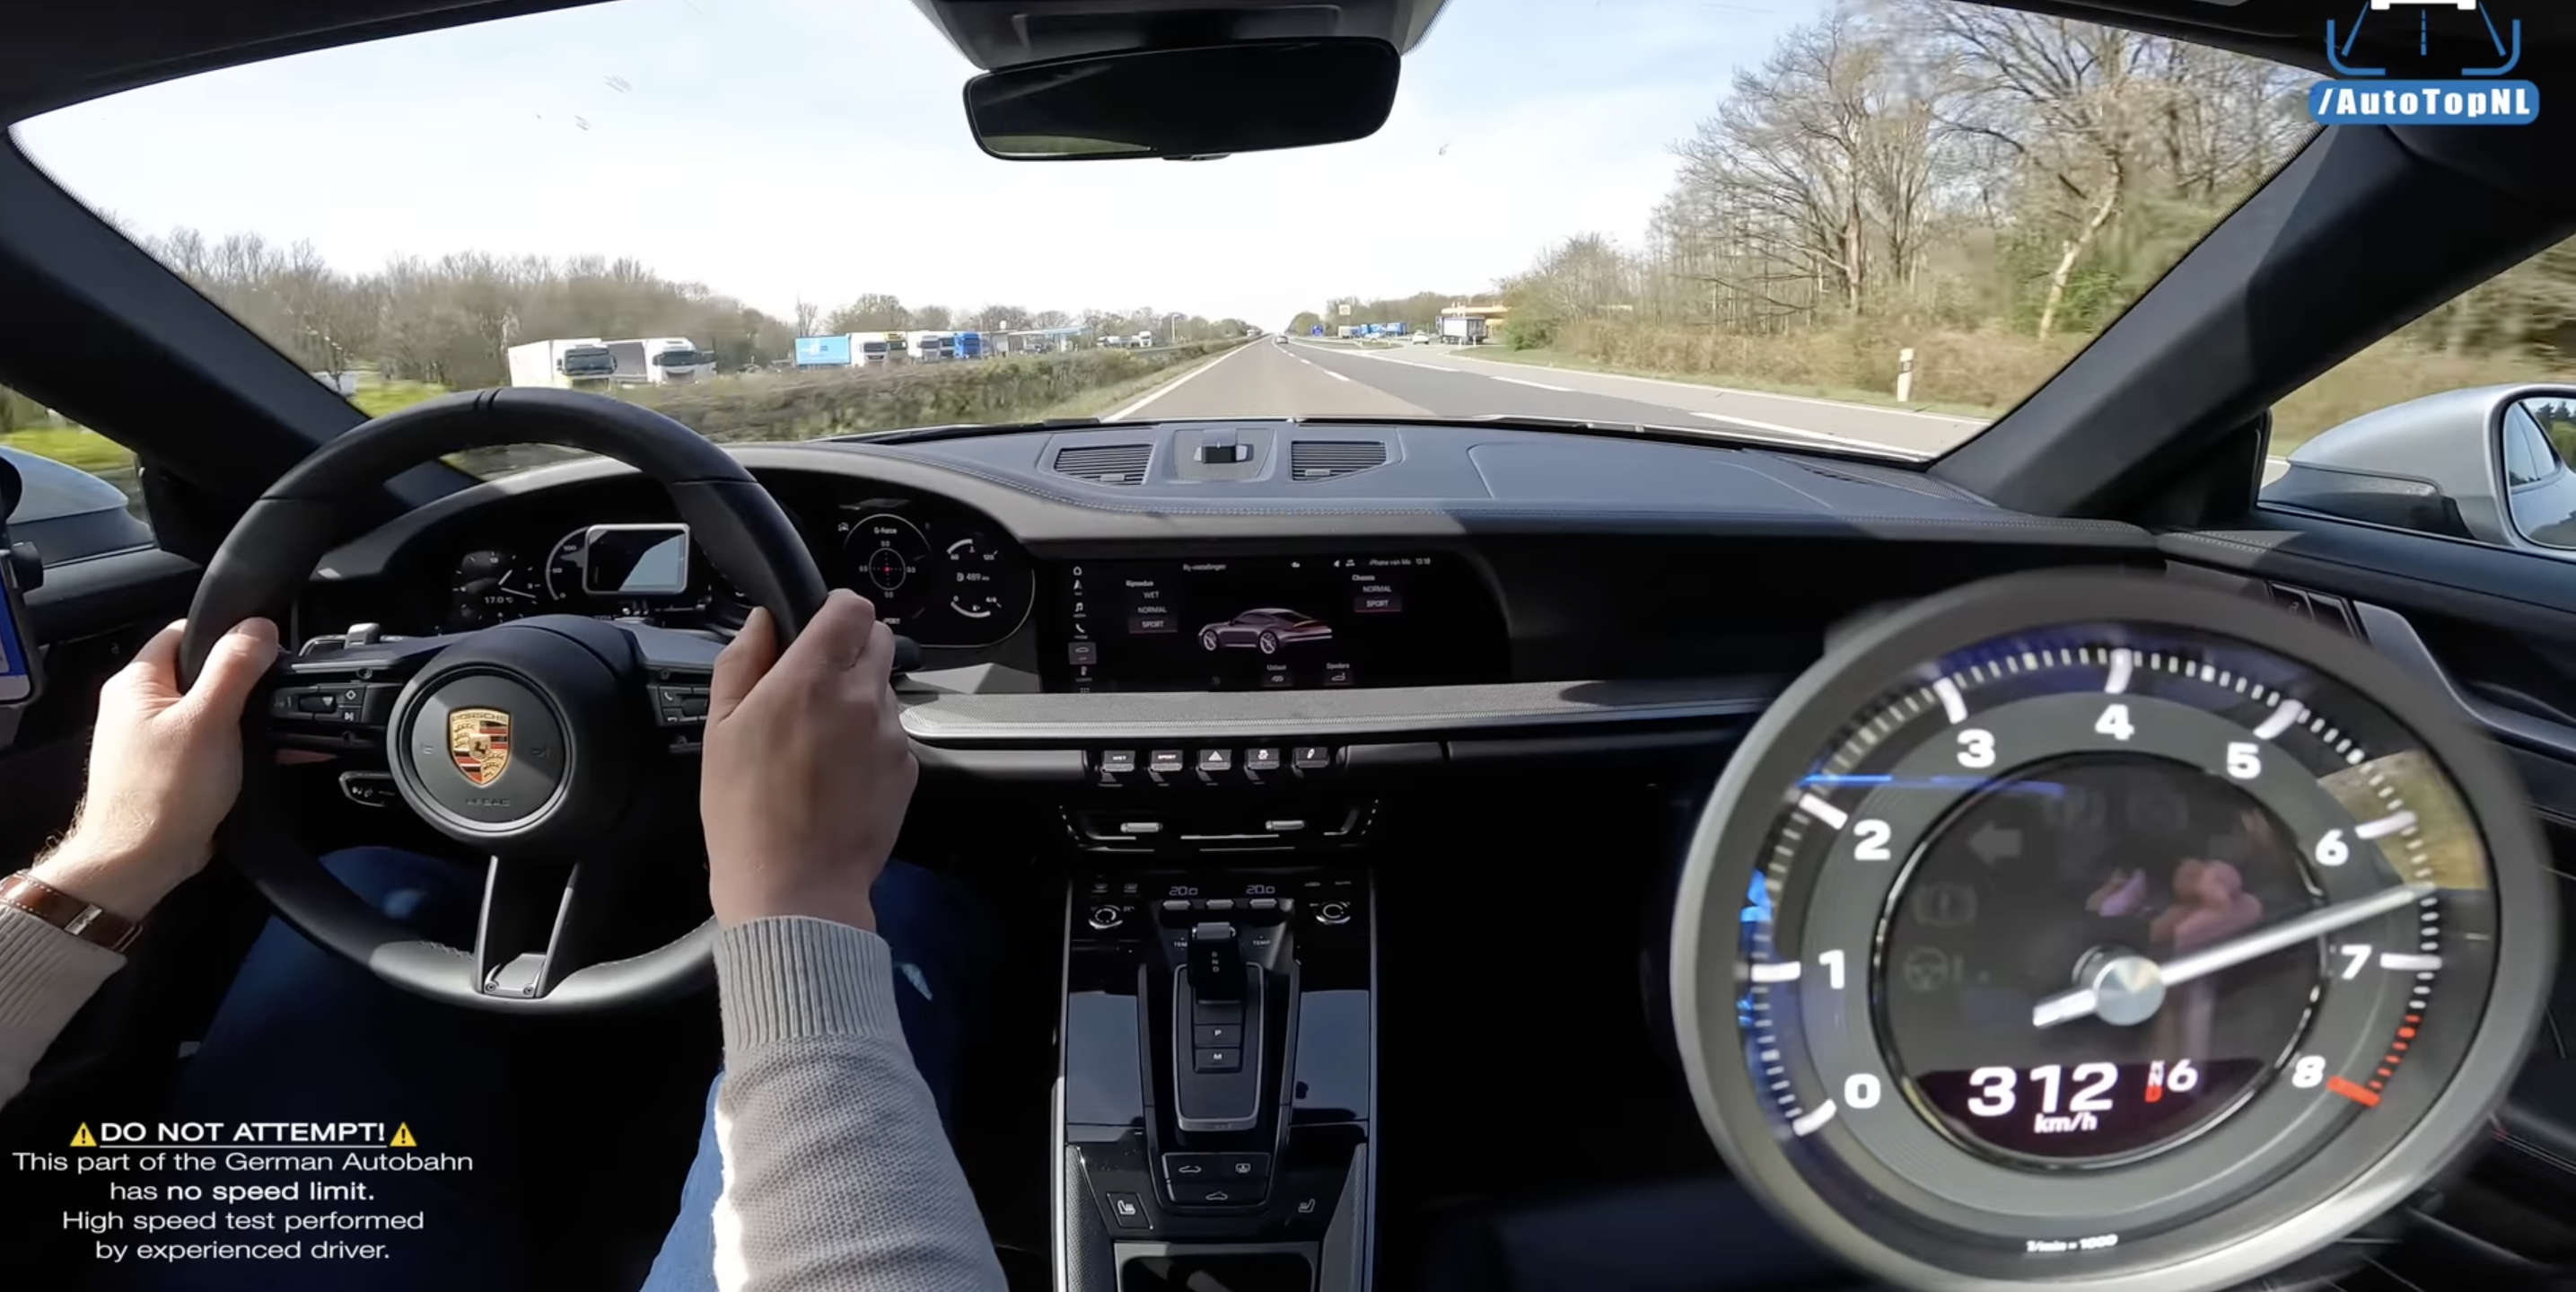 Watch a Base Porsche 911 Hit Nearly 200 MPH on the Autobahn